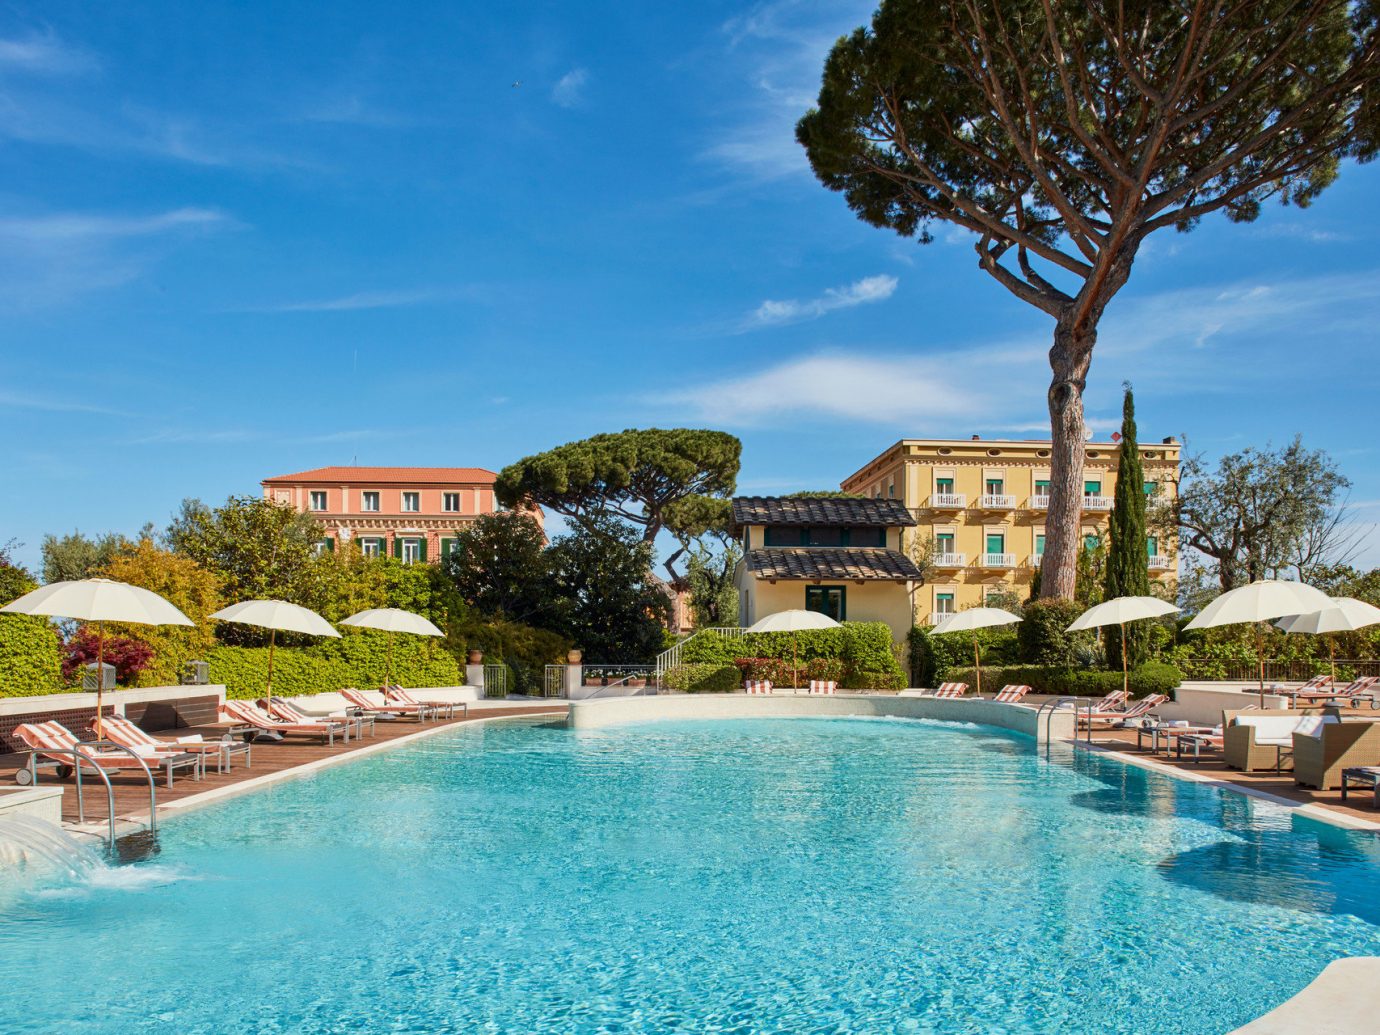 Pool and exterior view of Grand Hotel Excelsior Vittoria, Sorrento